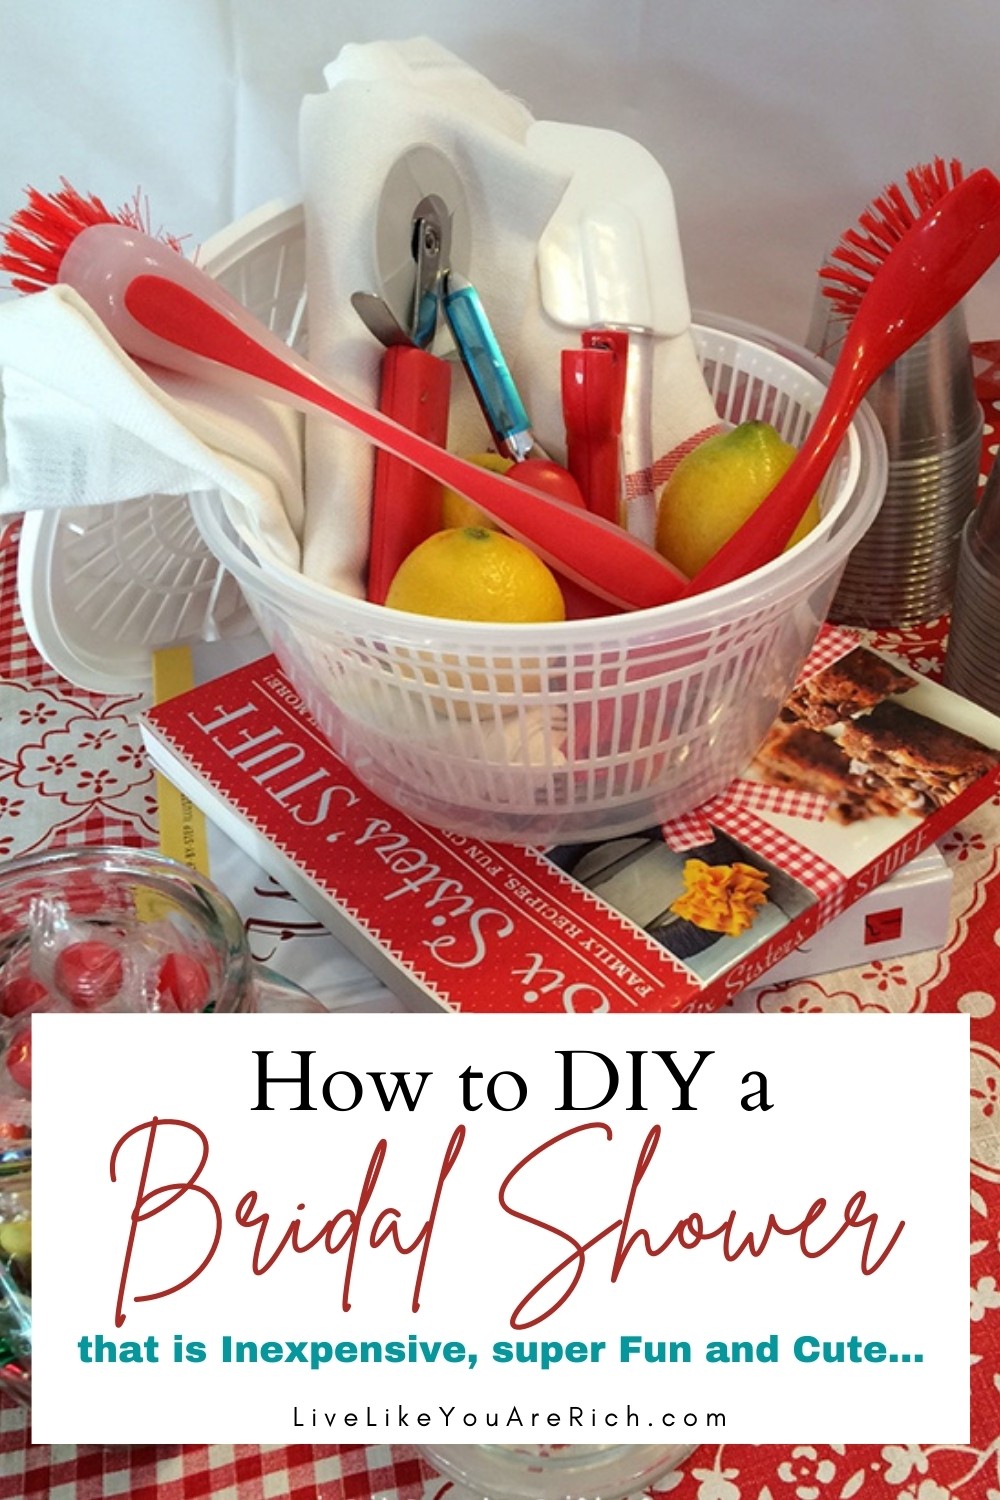 Looking for inexpensive bridal shower ideas? You have to see this simple, inexpensive, fun, and cute kitchen themed bridal shower idea. These gave you a few great ideas on throwing a bridal shower party on a budget. #bridalshower #bridalshowerideas